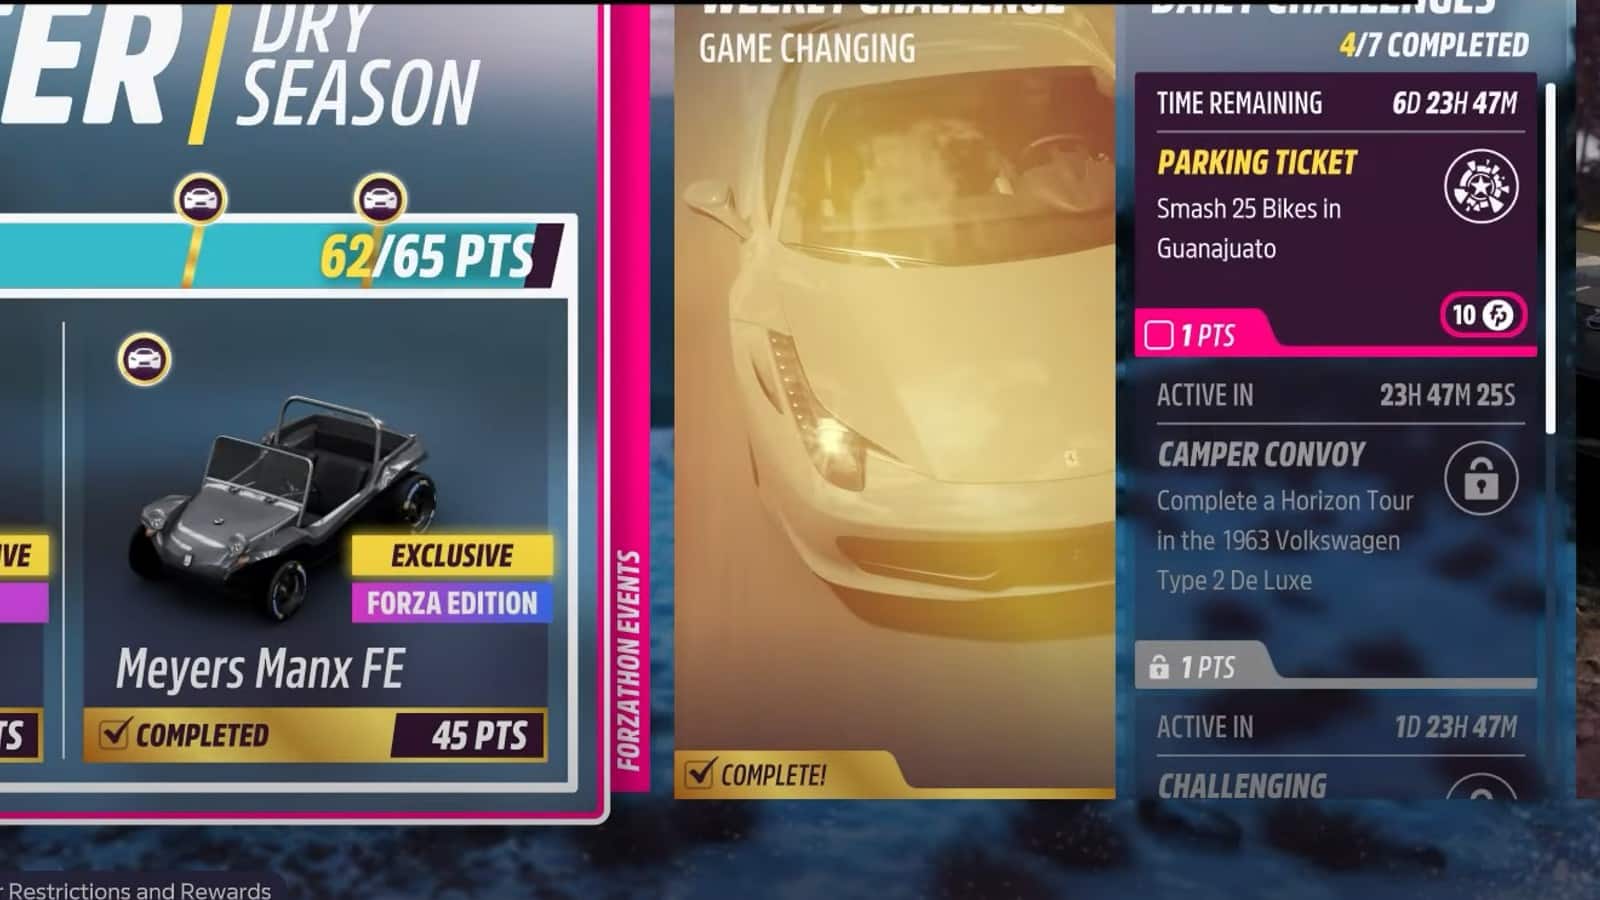 The Parking Ticket challegne in Forza Horizon 5 asks players to knock over bikes